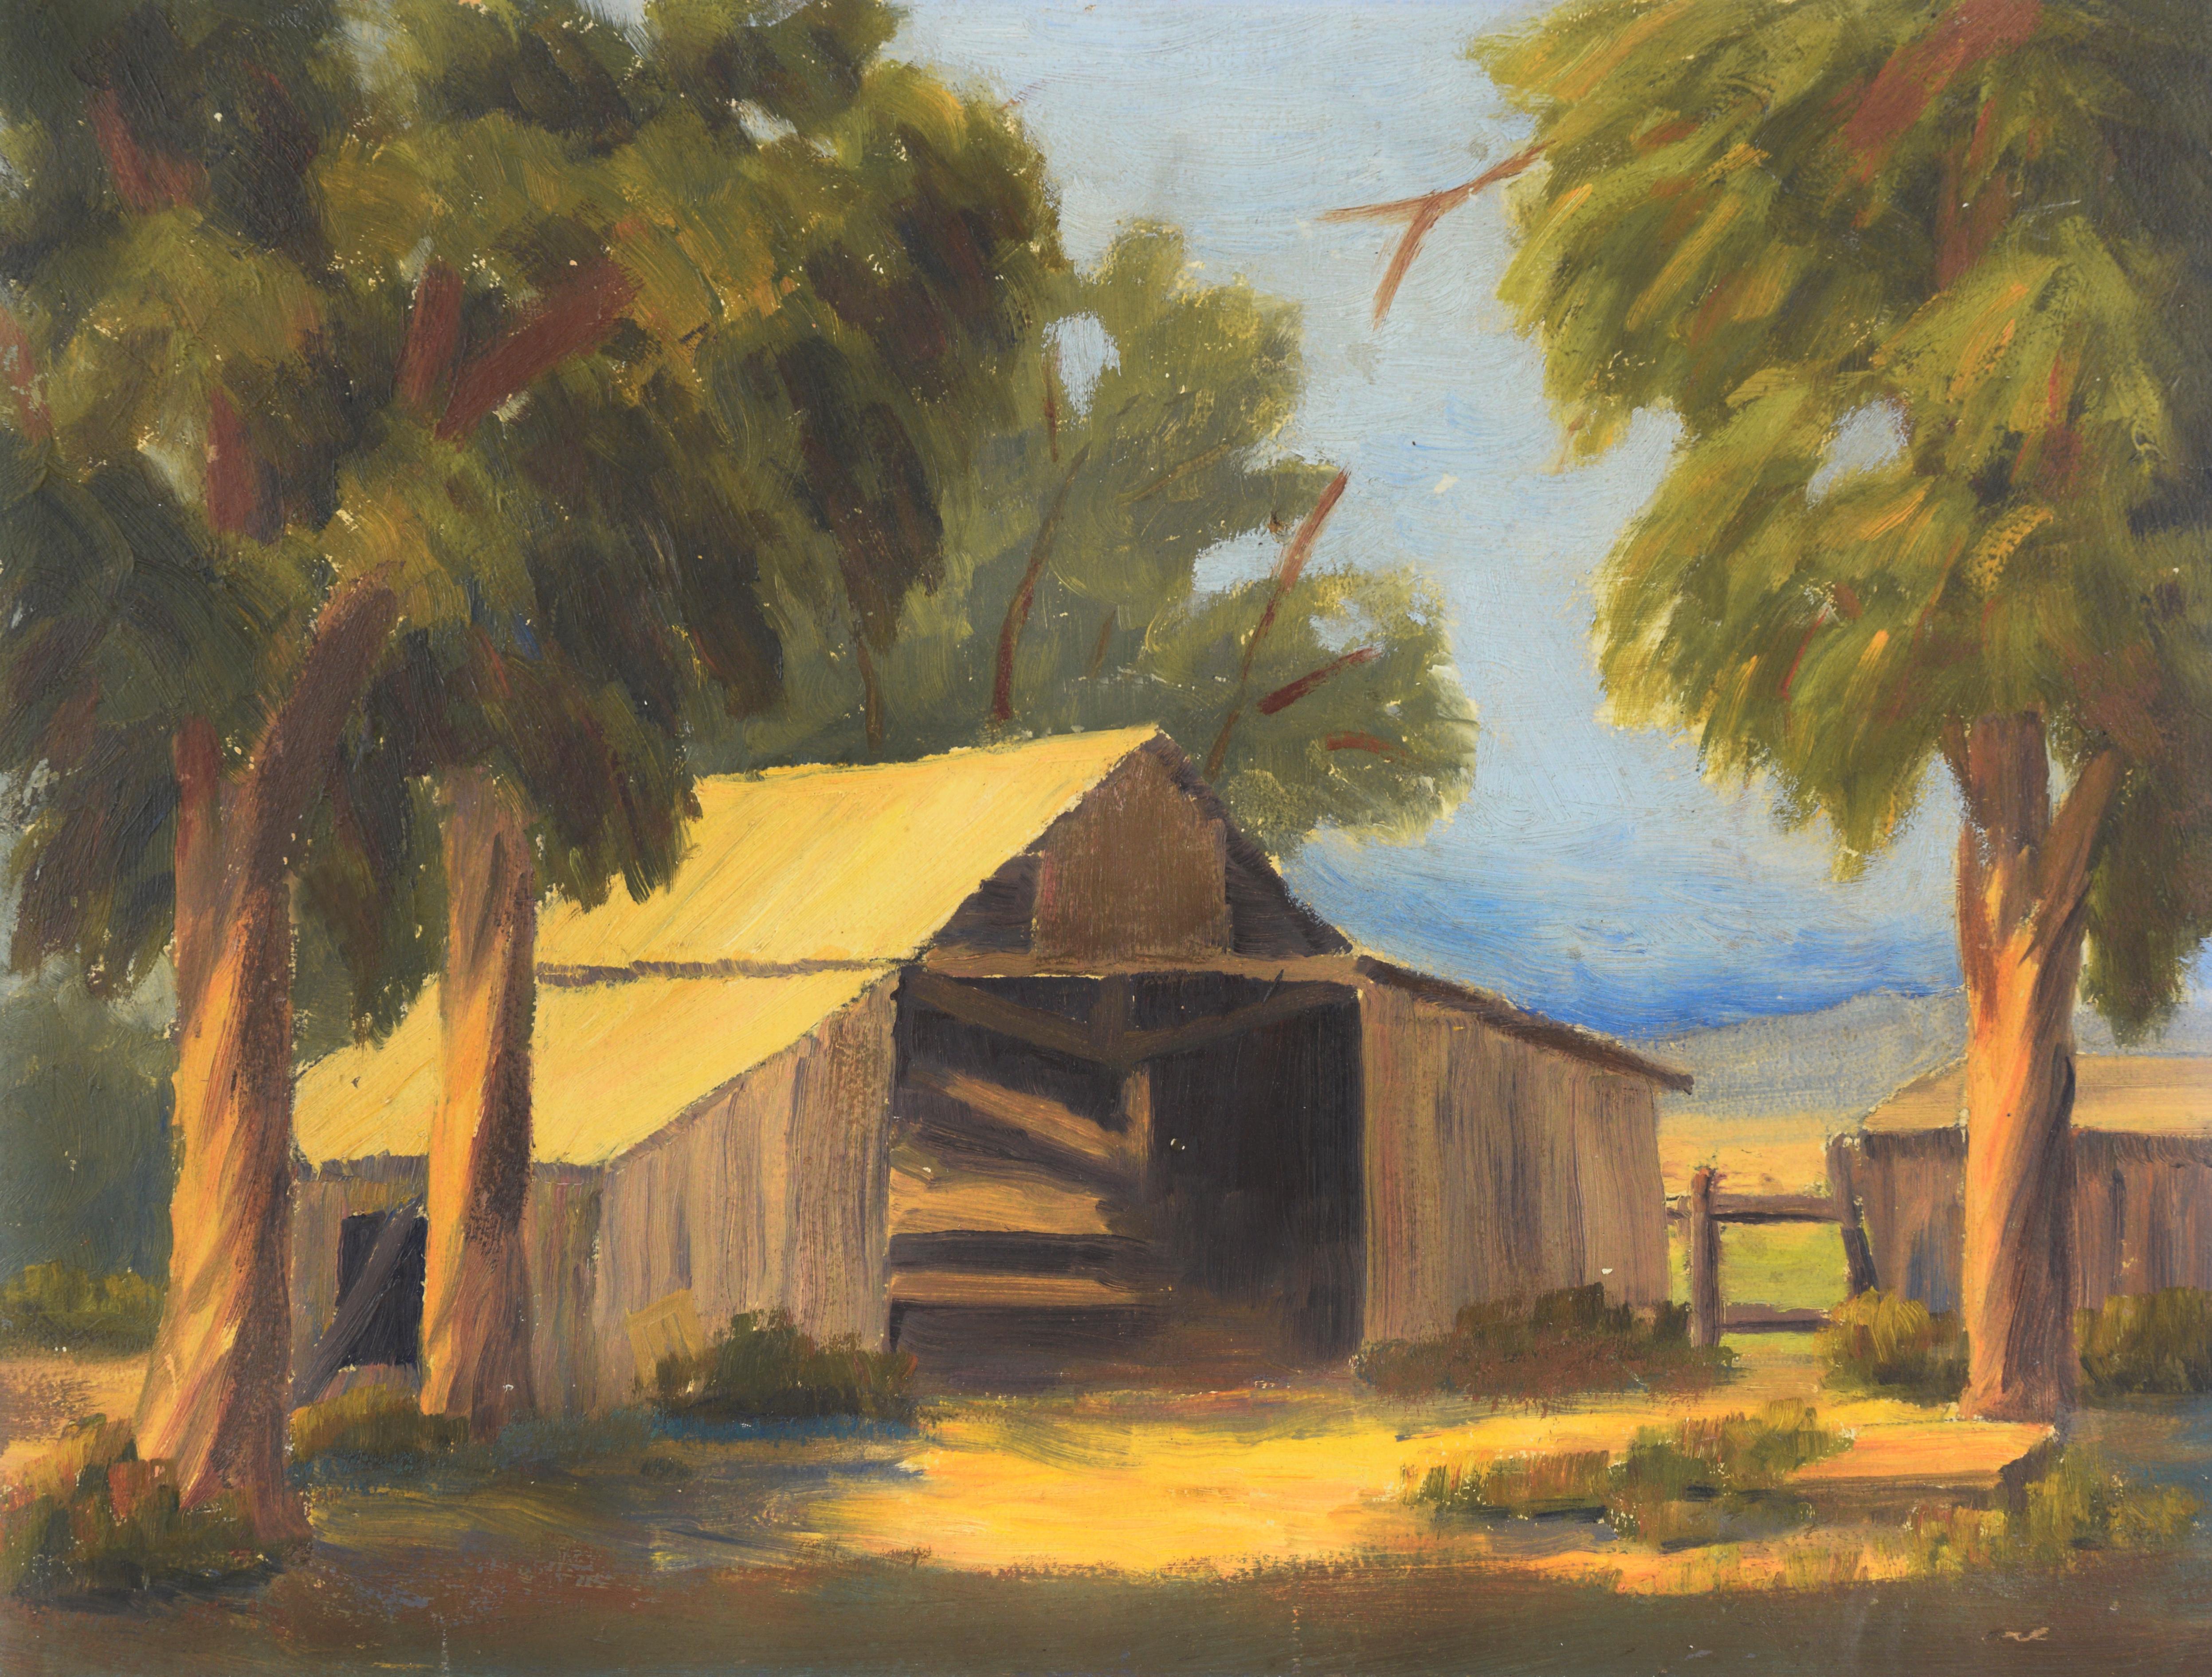 Unknown Landscape Painting - The Empty Barn - California Country Scene Oil on Canvas 